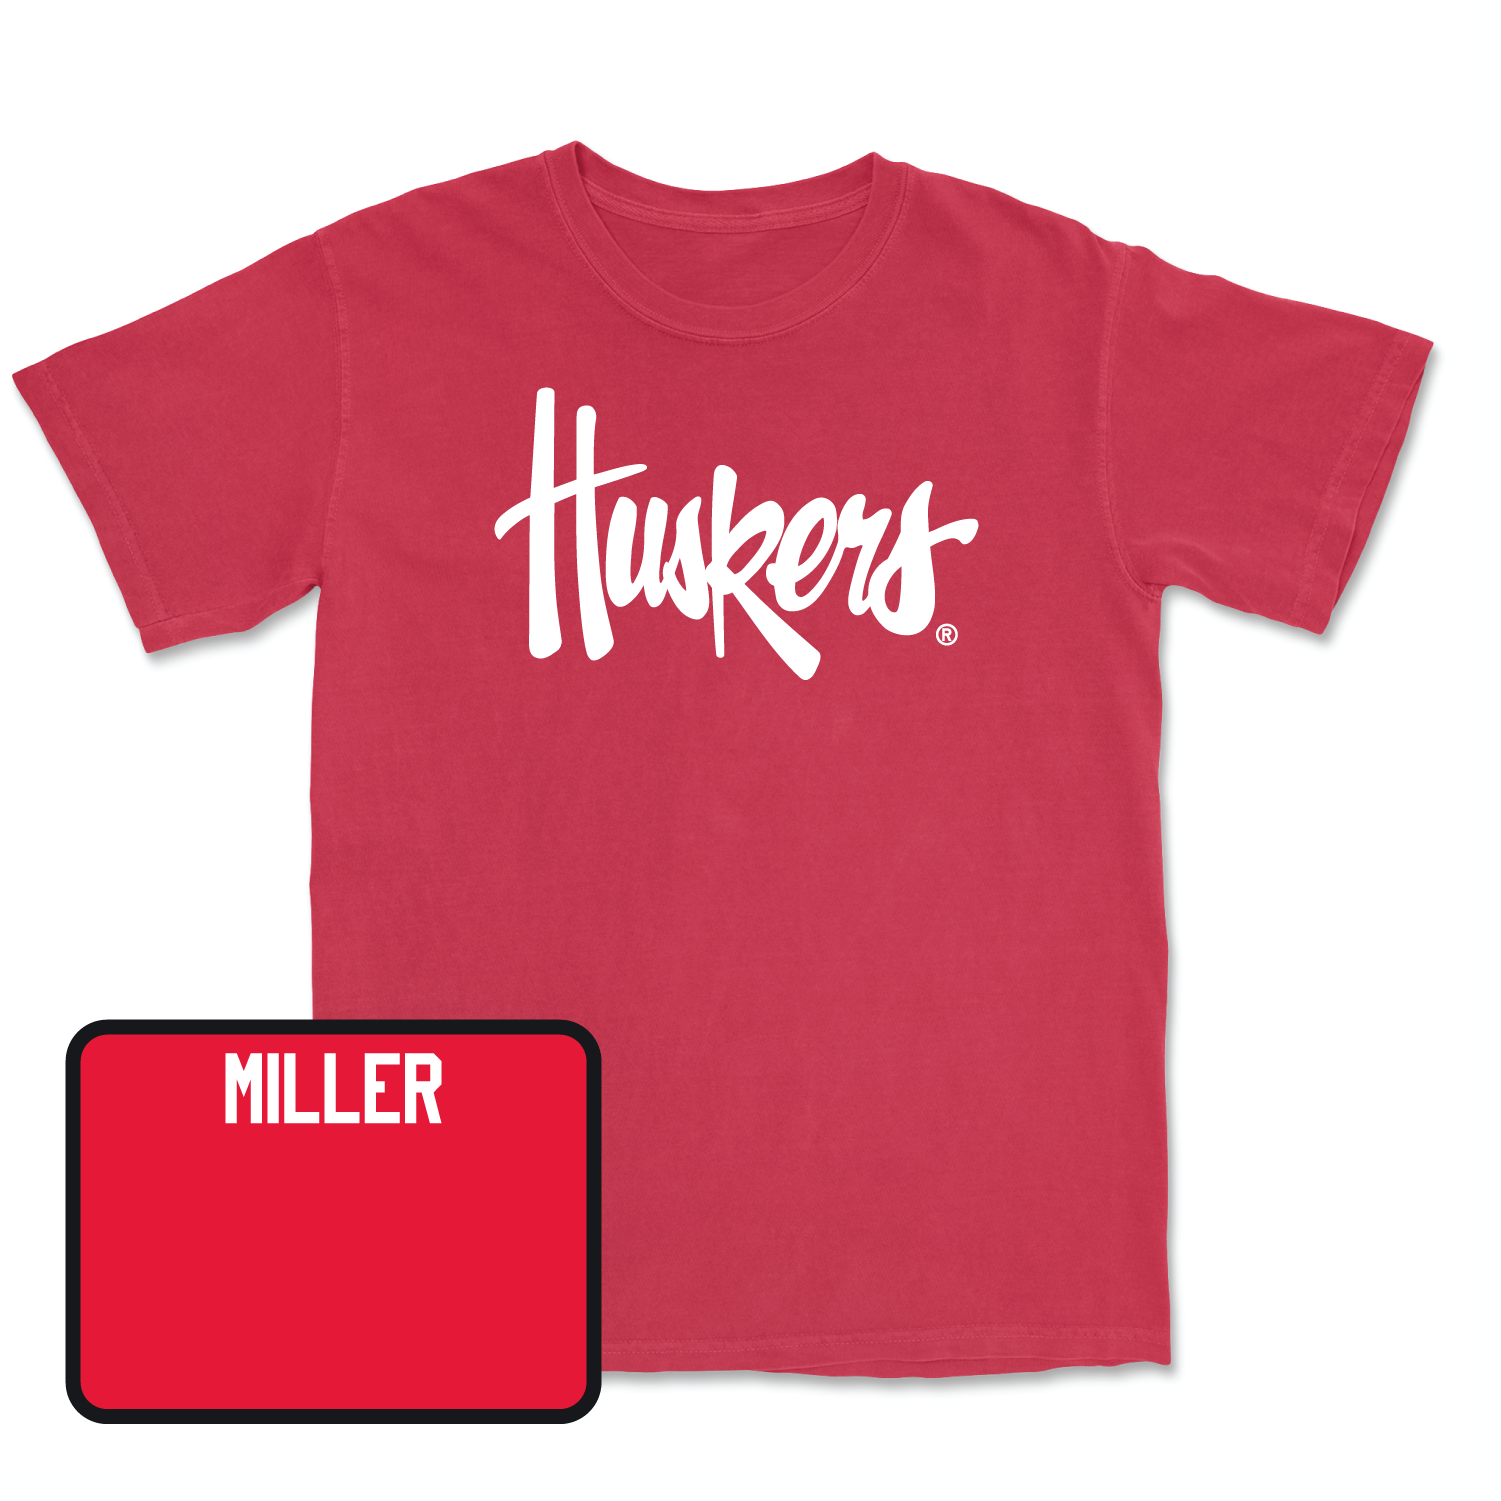 Red Track & Field Huskers Tee Youth Medium / Brooklyn Miller